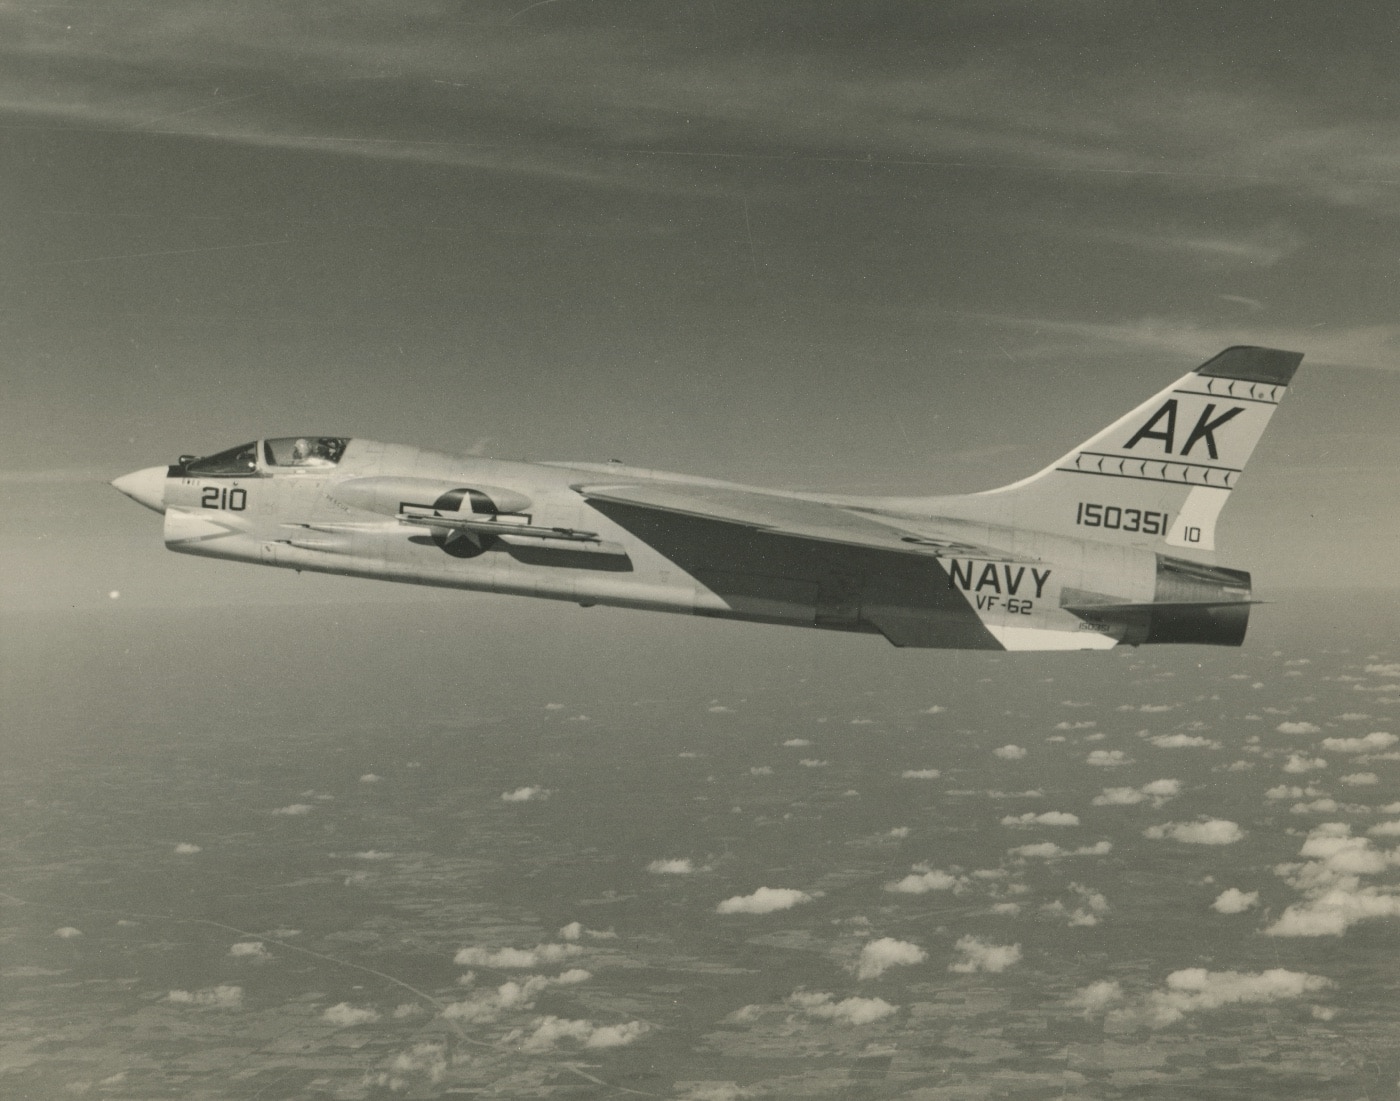 A left-side view of an F-8B Crusader of Fighter Wing 62 in flight on November 30, 1965. Image: Lt. j.g. Kay/U.S. Navy